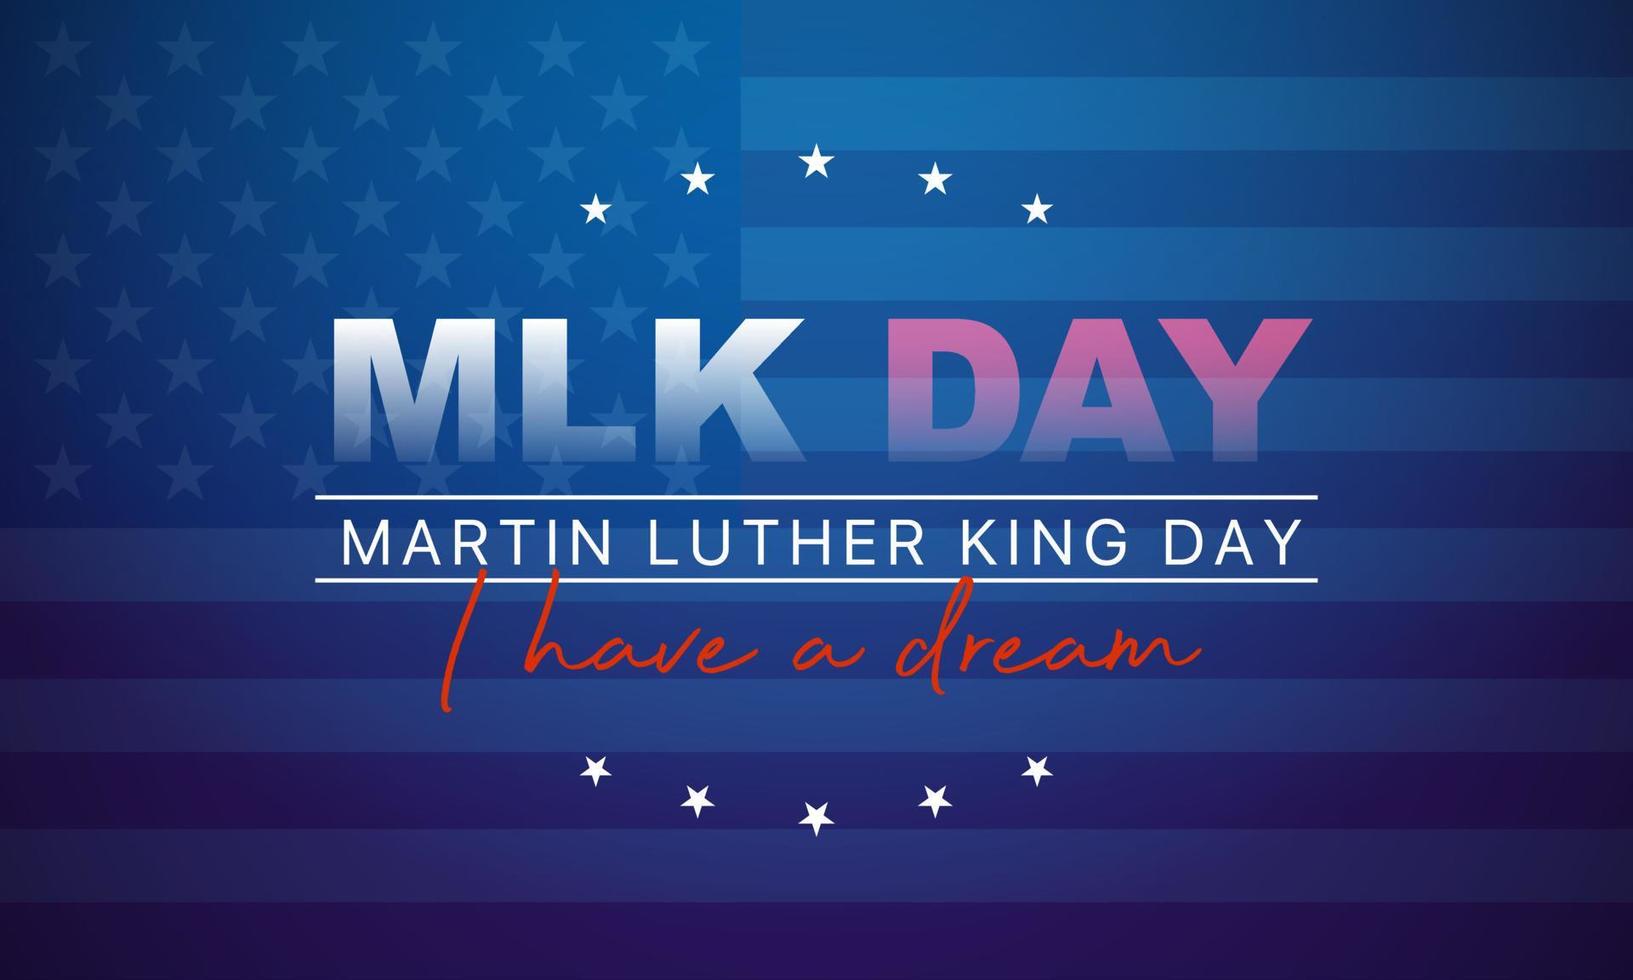 Martin Luther King Jr Day greeting card - I have a dream inspirational quote - horizontal blue background banner with US flag vector